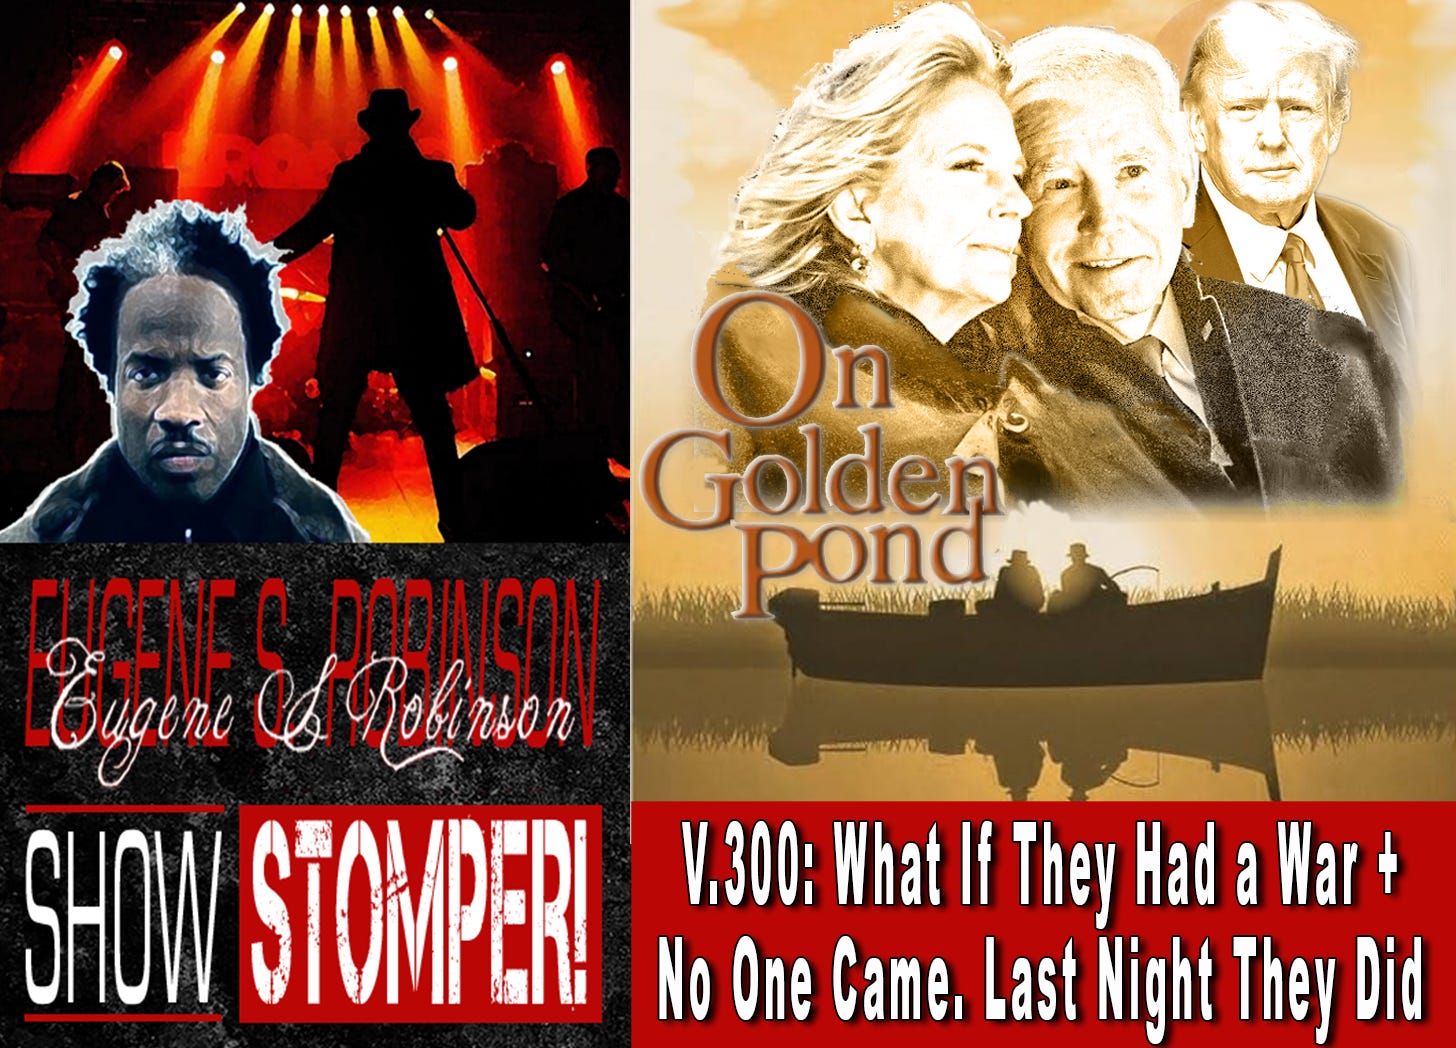 V.300: What If They Had a War + No One Came? Last Night They Did. On The Eugene S. Robinson Show Stomper!